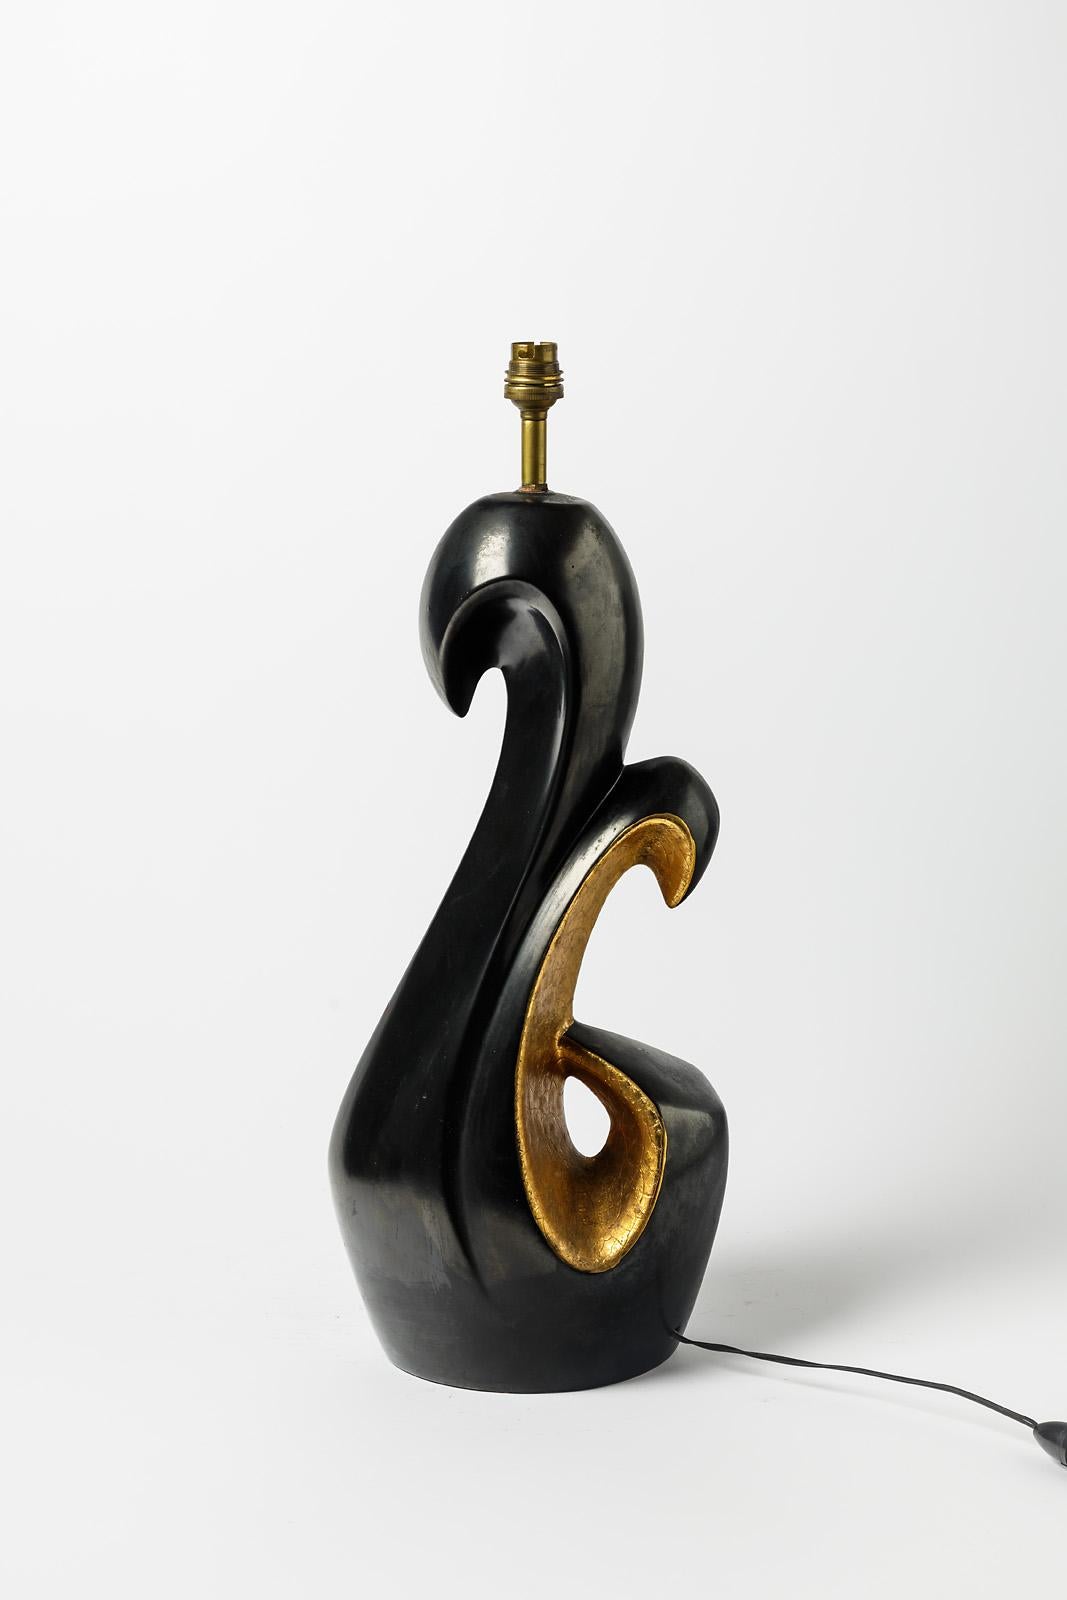 Large abstract ceramic table lamp

20th century French design

Black and gold ceramic glazes colors

Orginal perfect condition

H 46 cm 
H with electrical system 51 cm
Large 21 cm.